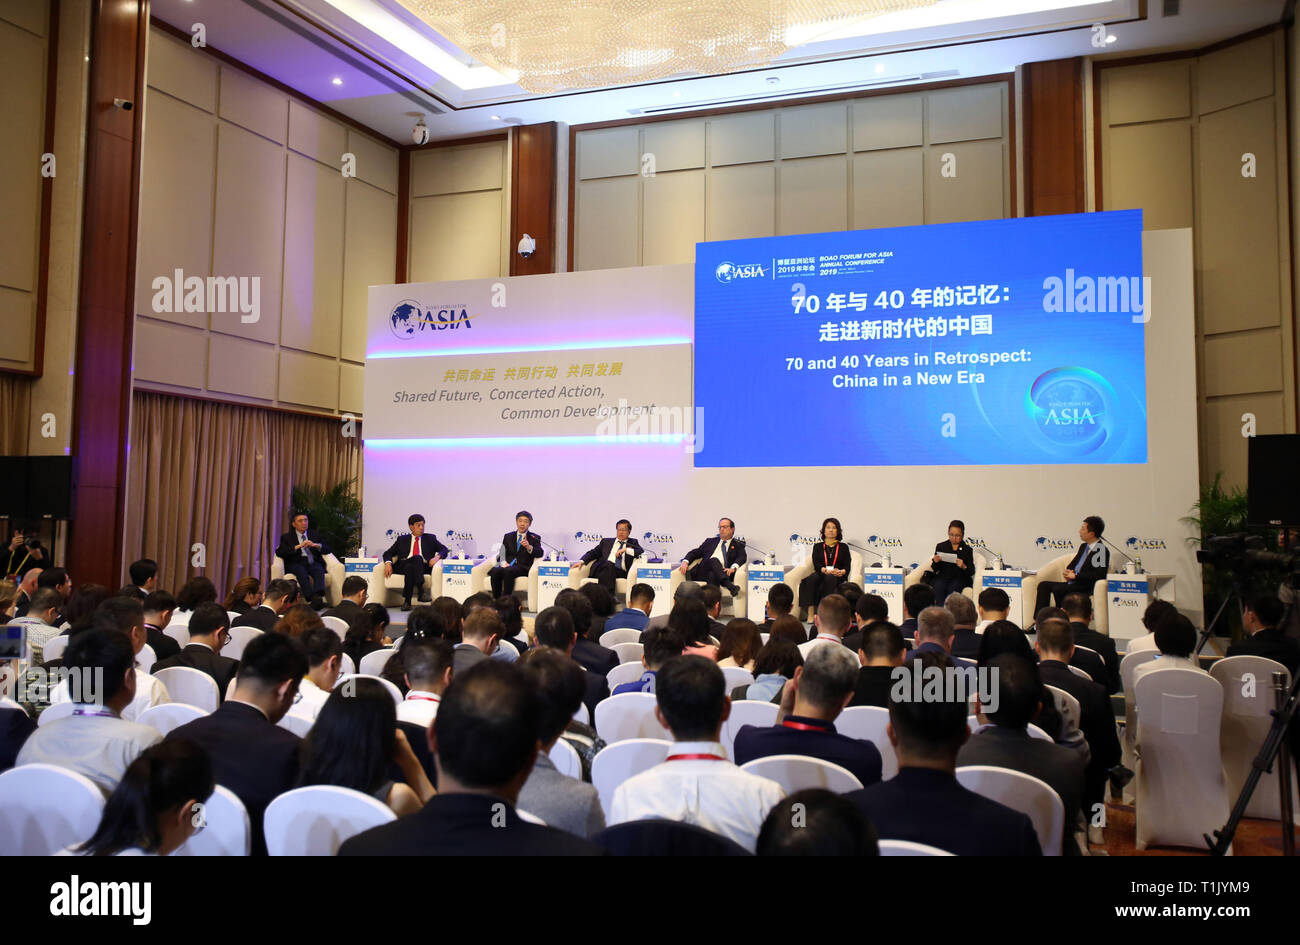 Boao. 26th Mar, 2019. Photo taken on March 26, 2019 shows the session of '70 and 40 Years in Retrospect: China in a New Era' during the Boao Forum for Asia Annual Conference 2019 in Boao, south China's Hainan Province. Credit: Sui Xiankai/Xinhua/Alamy Live News Stock Photo